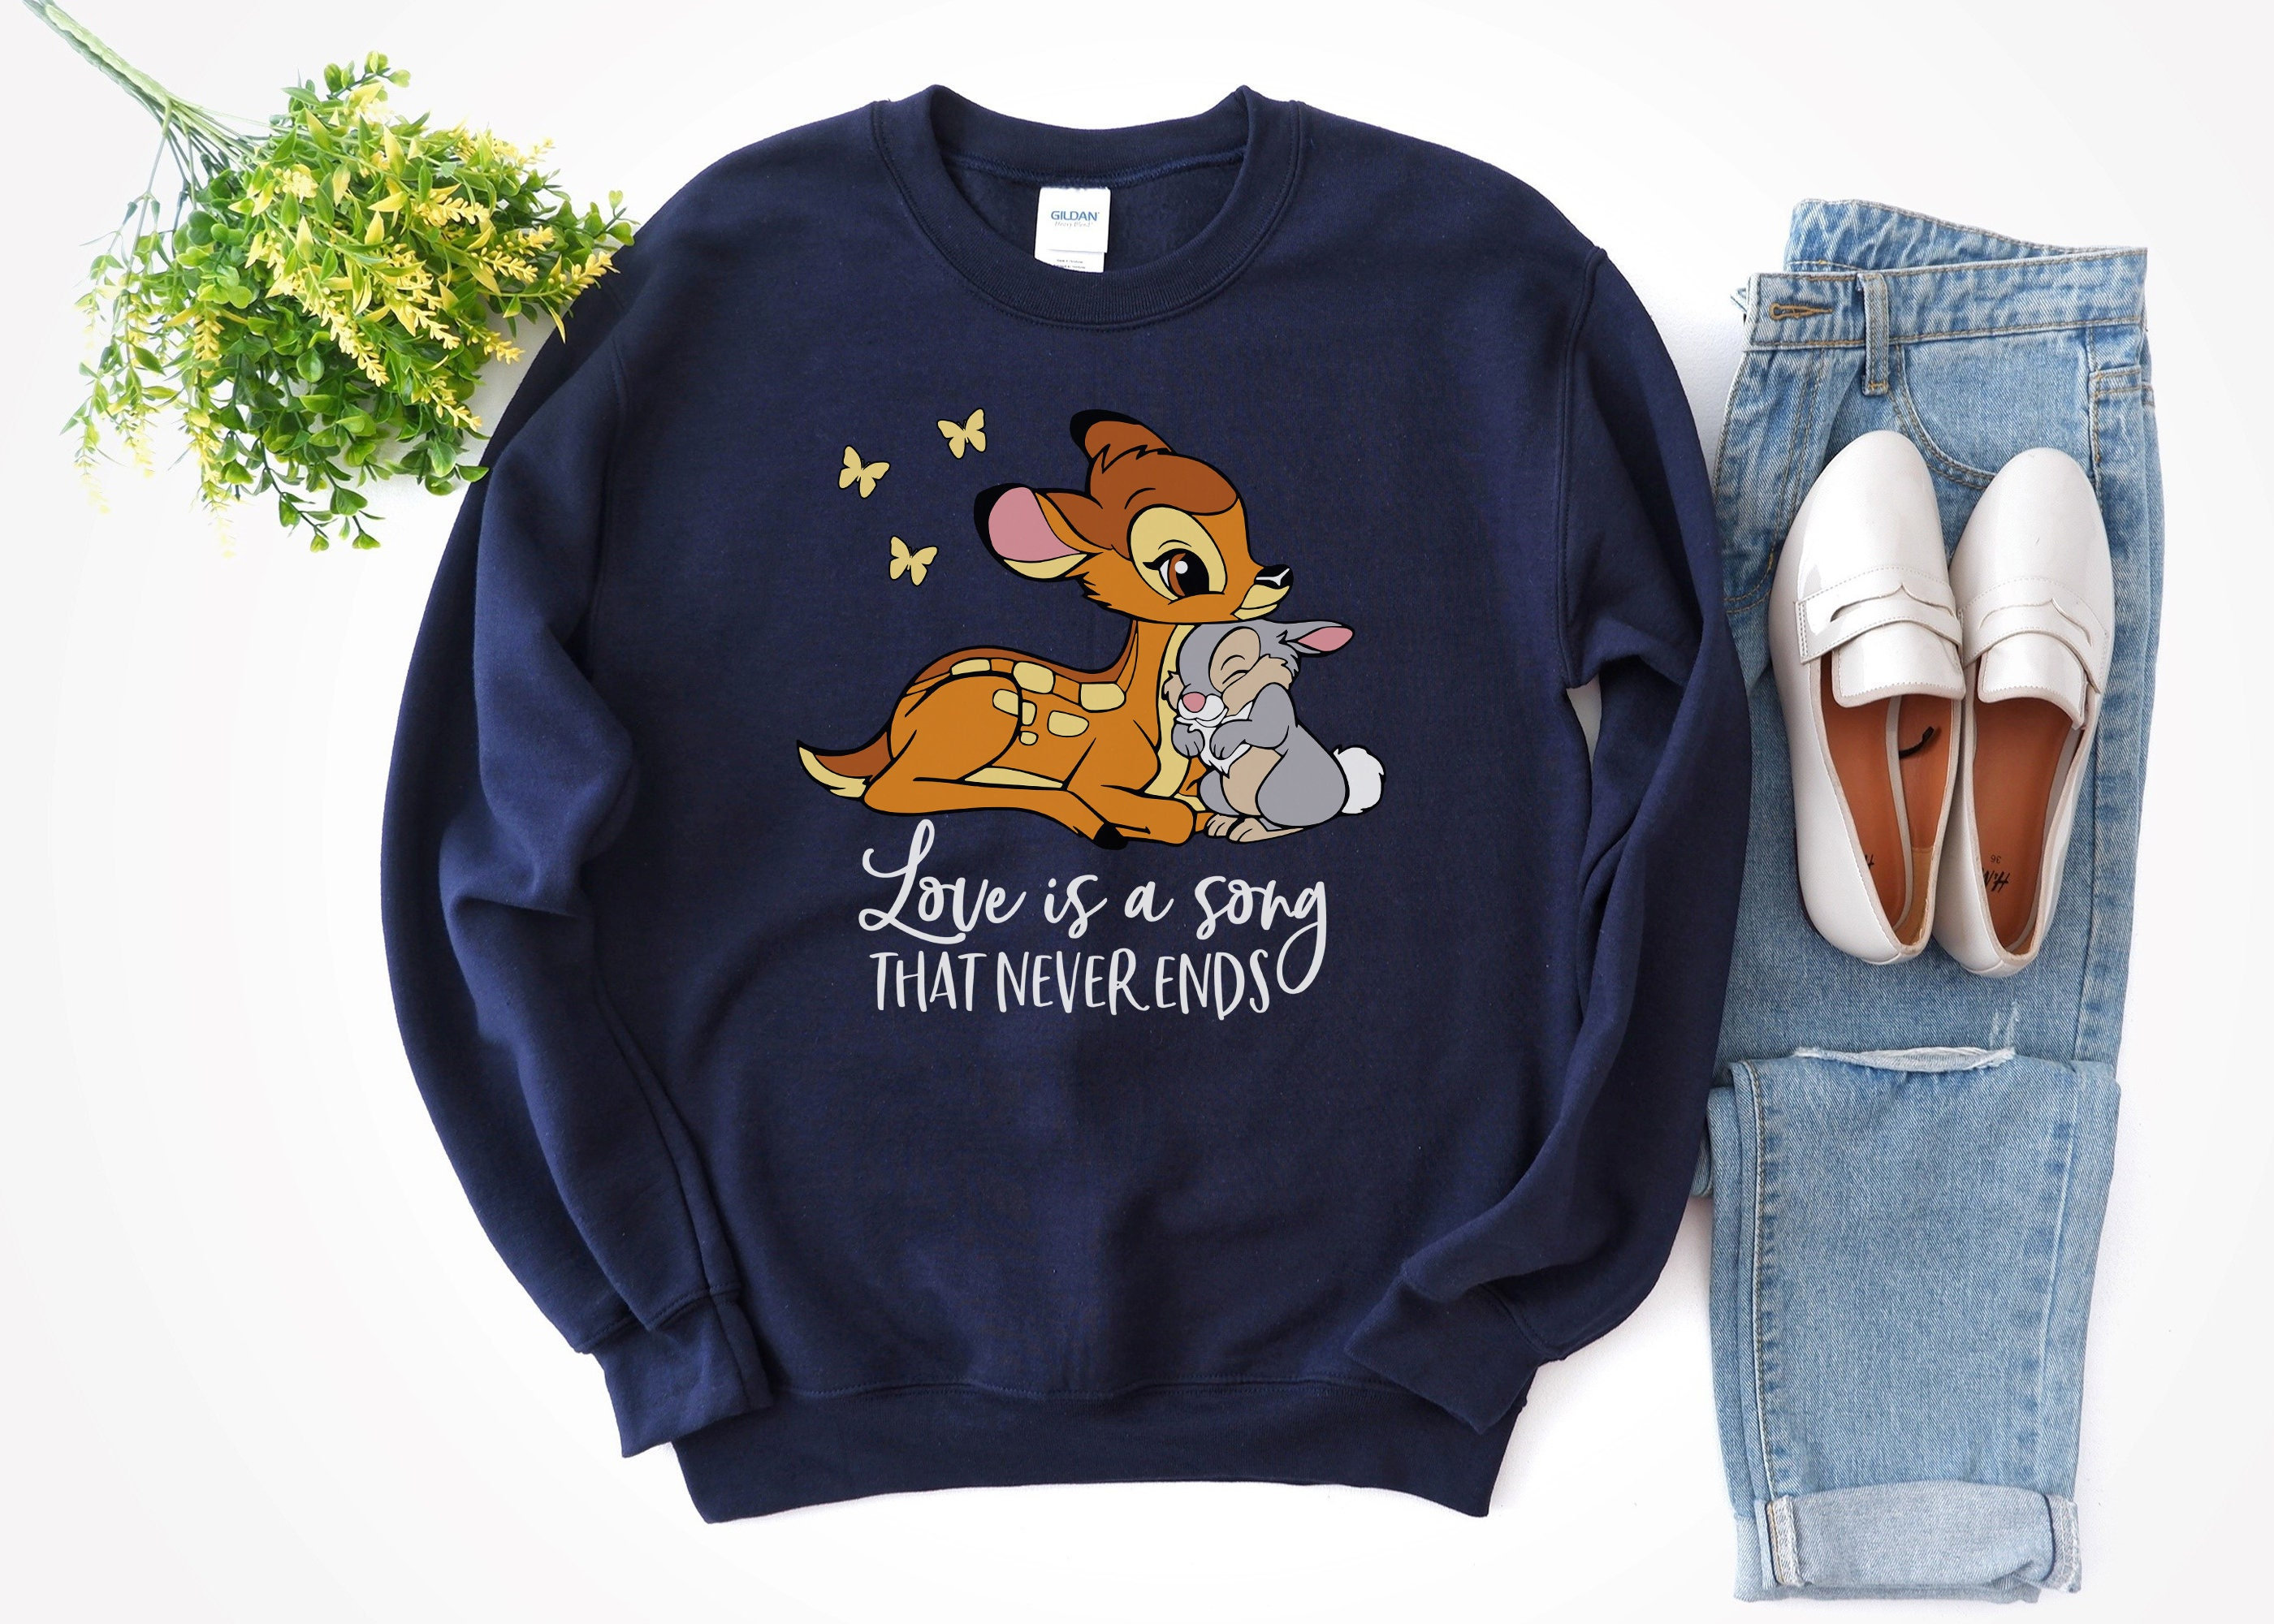 Sweatshirt Etsy Crewneck - Unisex Bambi Song is That Thumper Ends Love A Never Disney